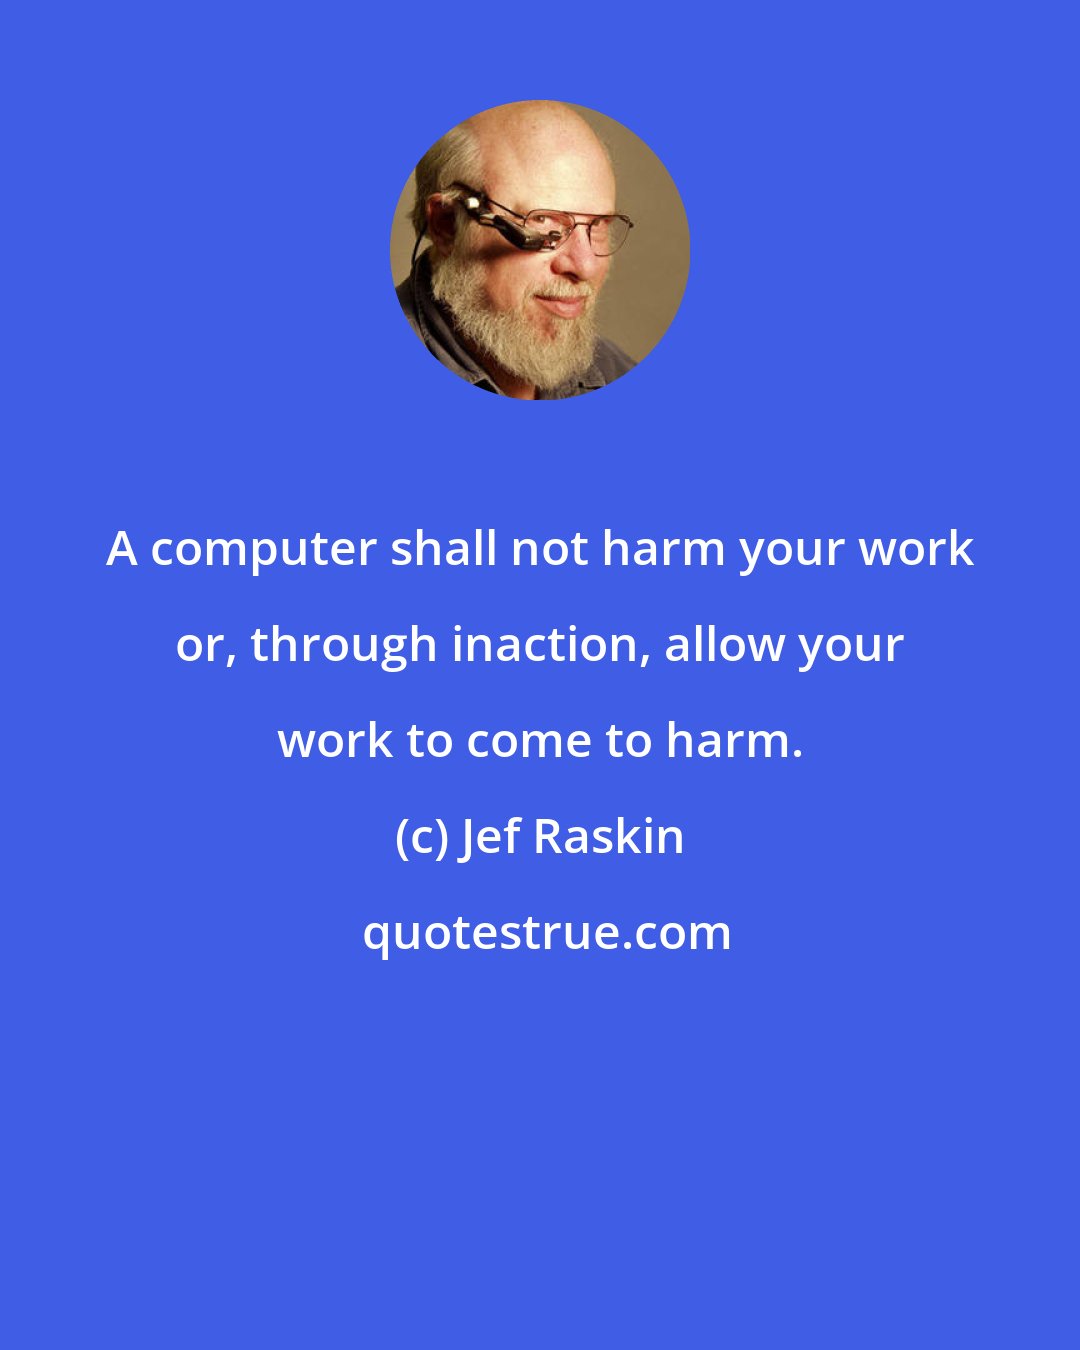 Jef Raskin: A computer shall not harm your work or, through inaction, allow your work to come to harm.